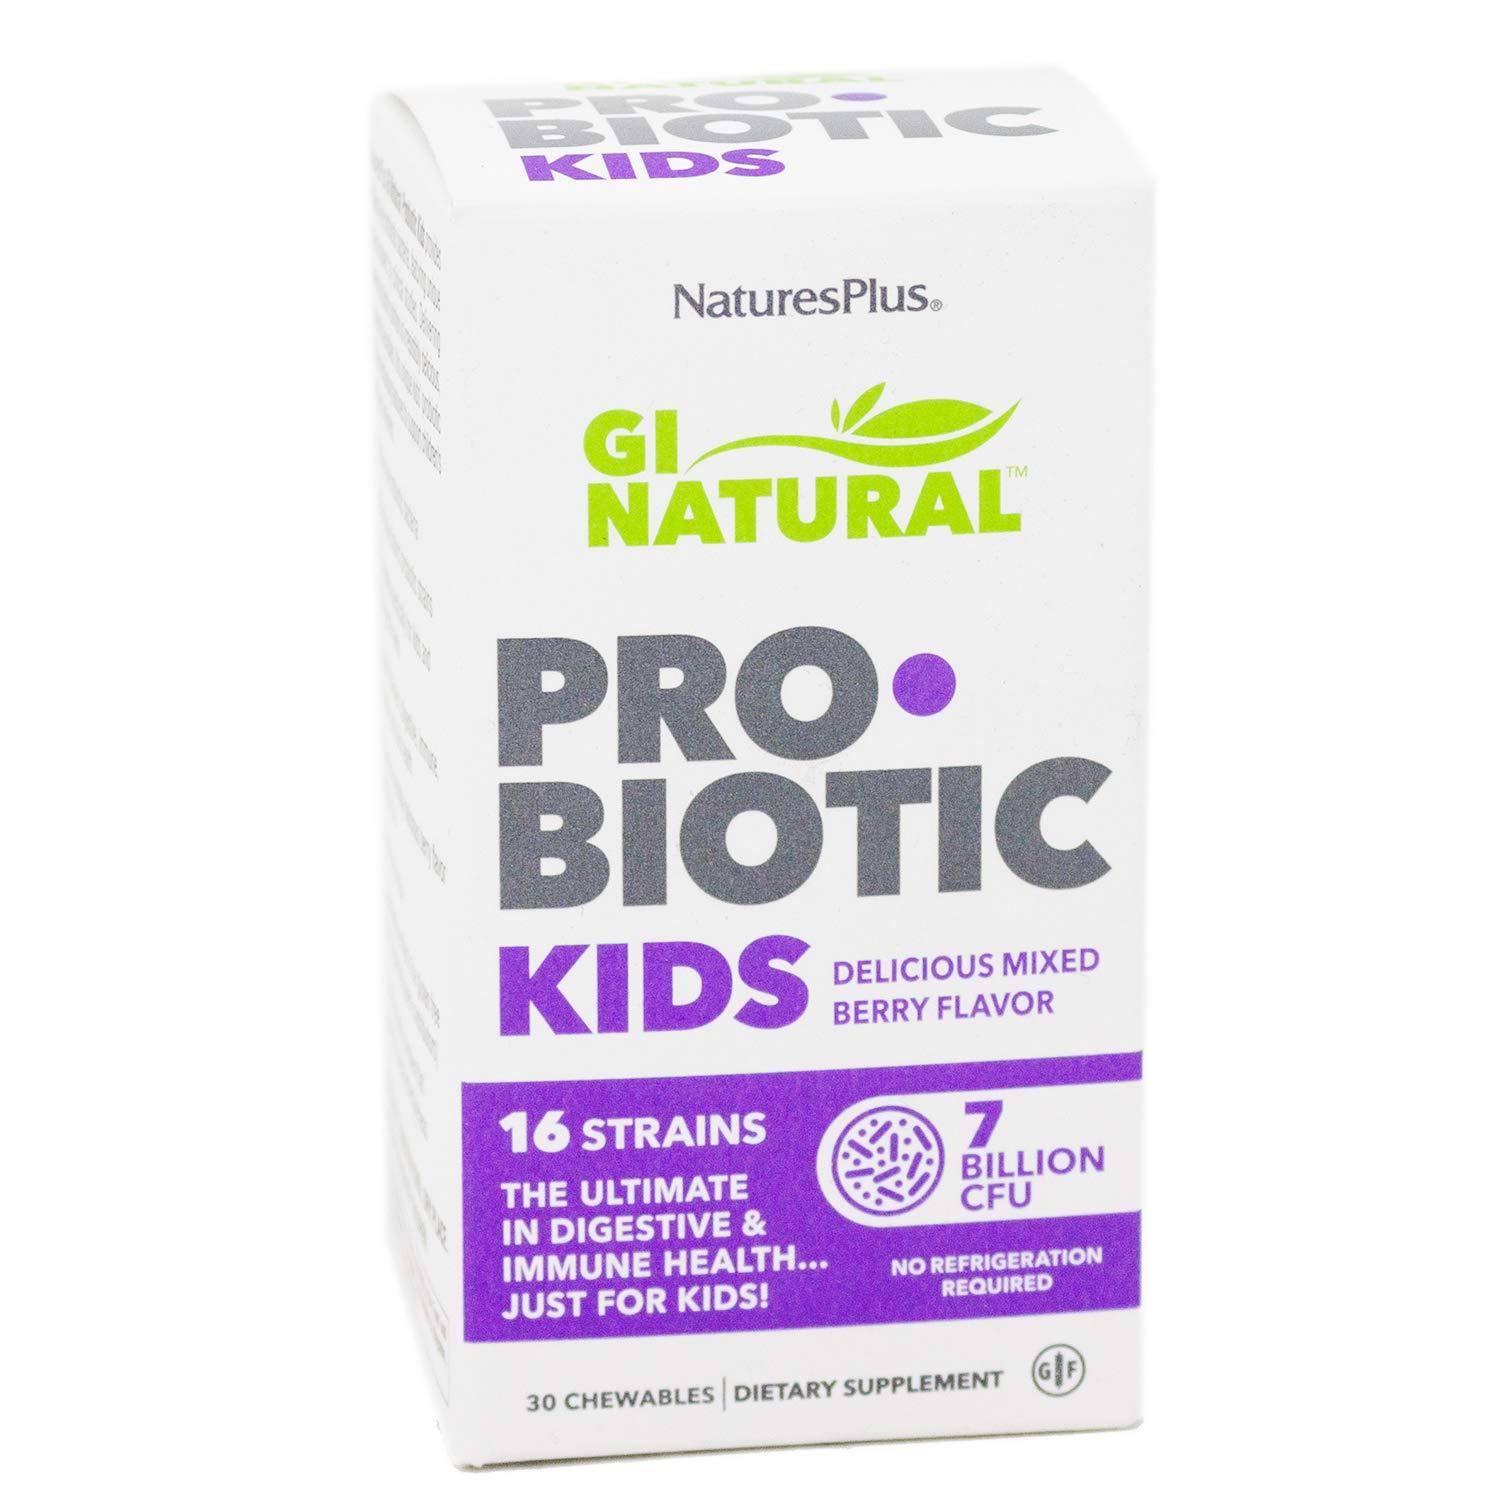 Nature's Plus - Gi Natural Probiotic Kids, Mixed Berry Flavor - 30